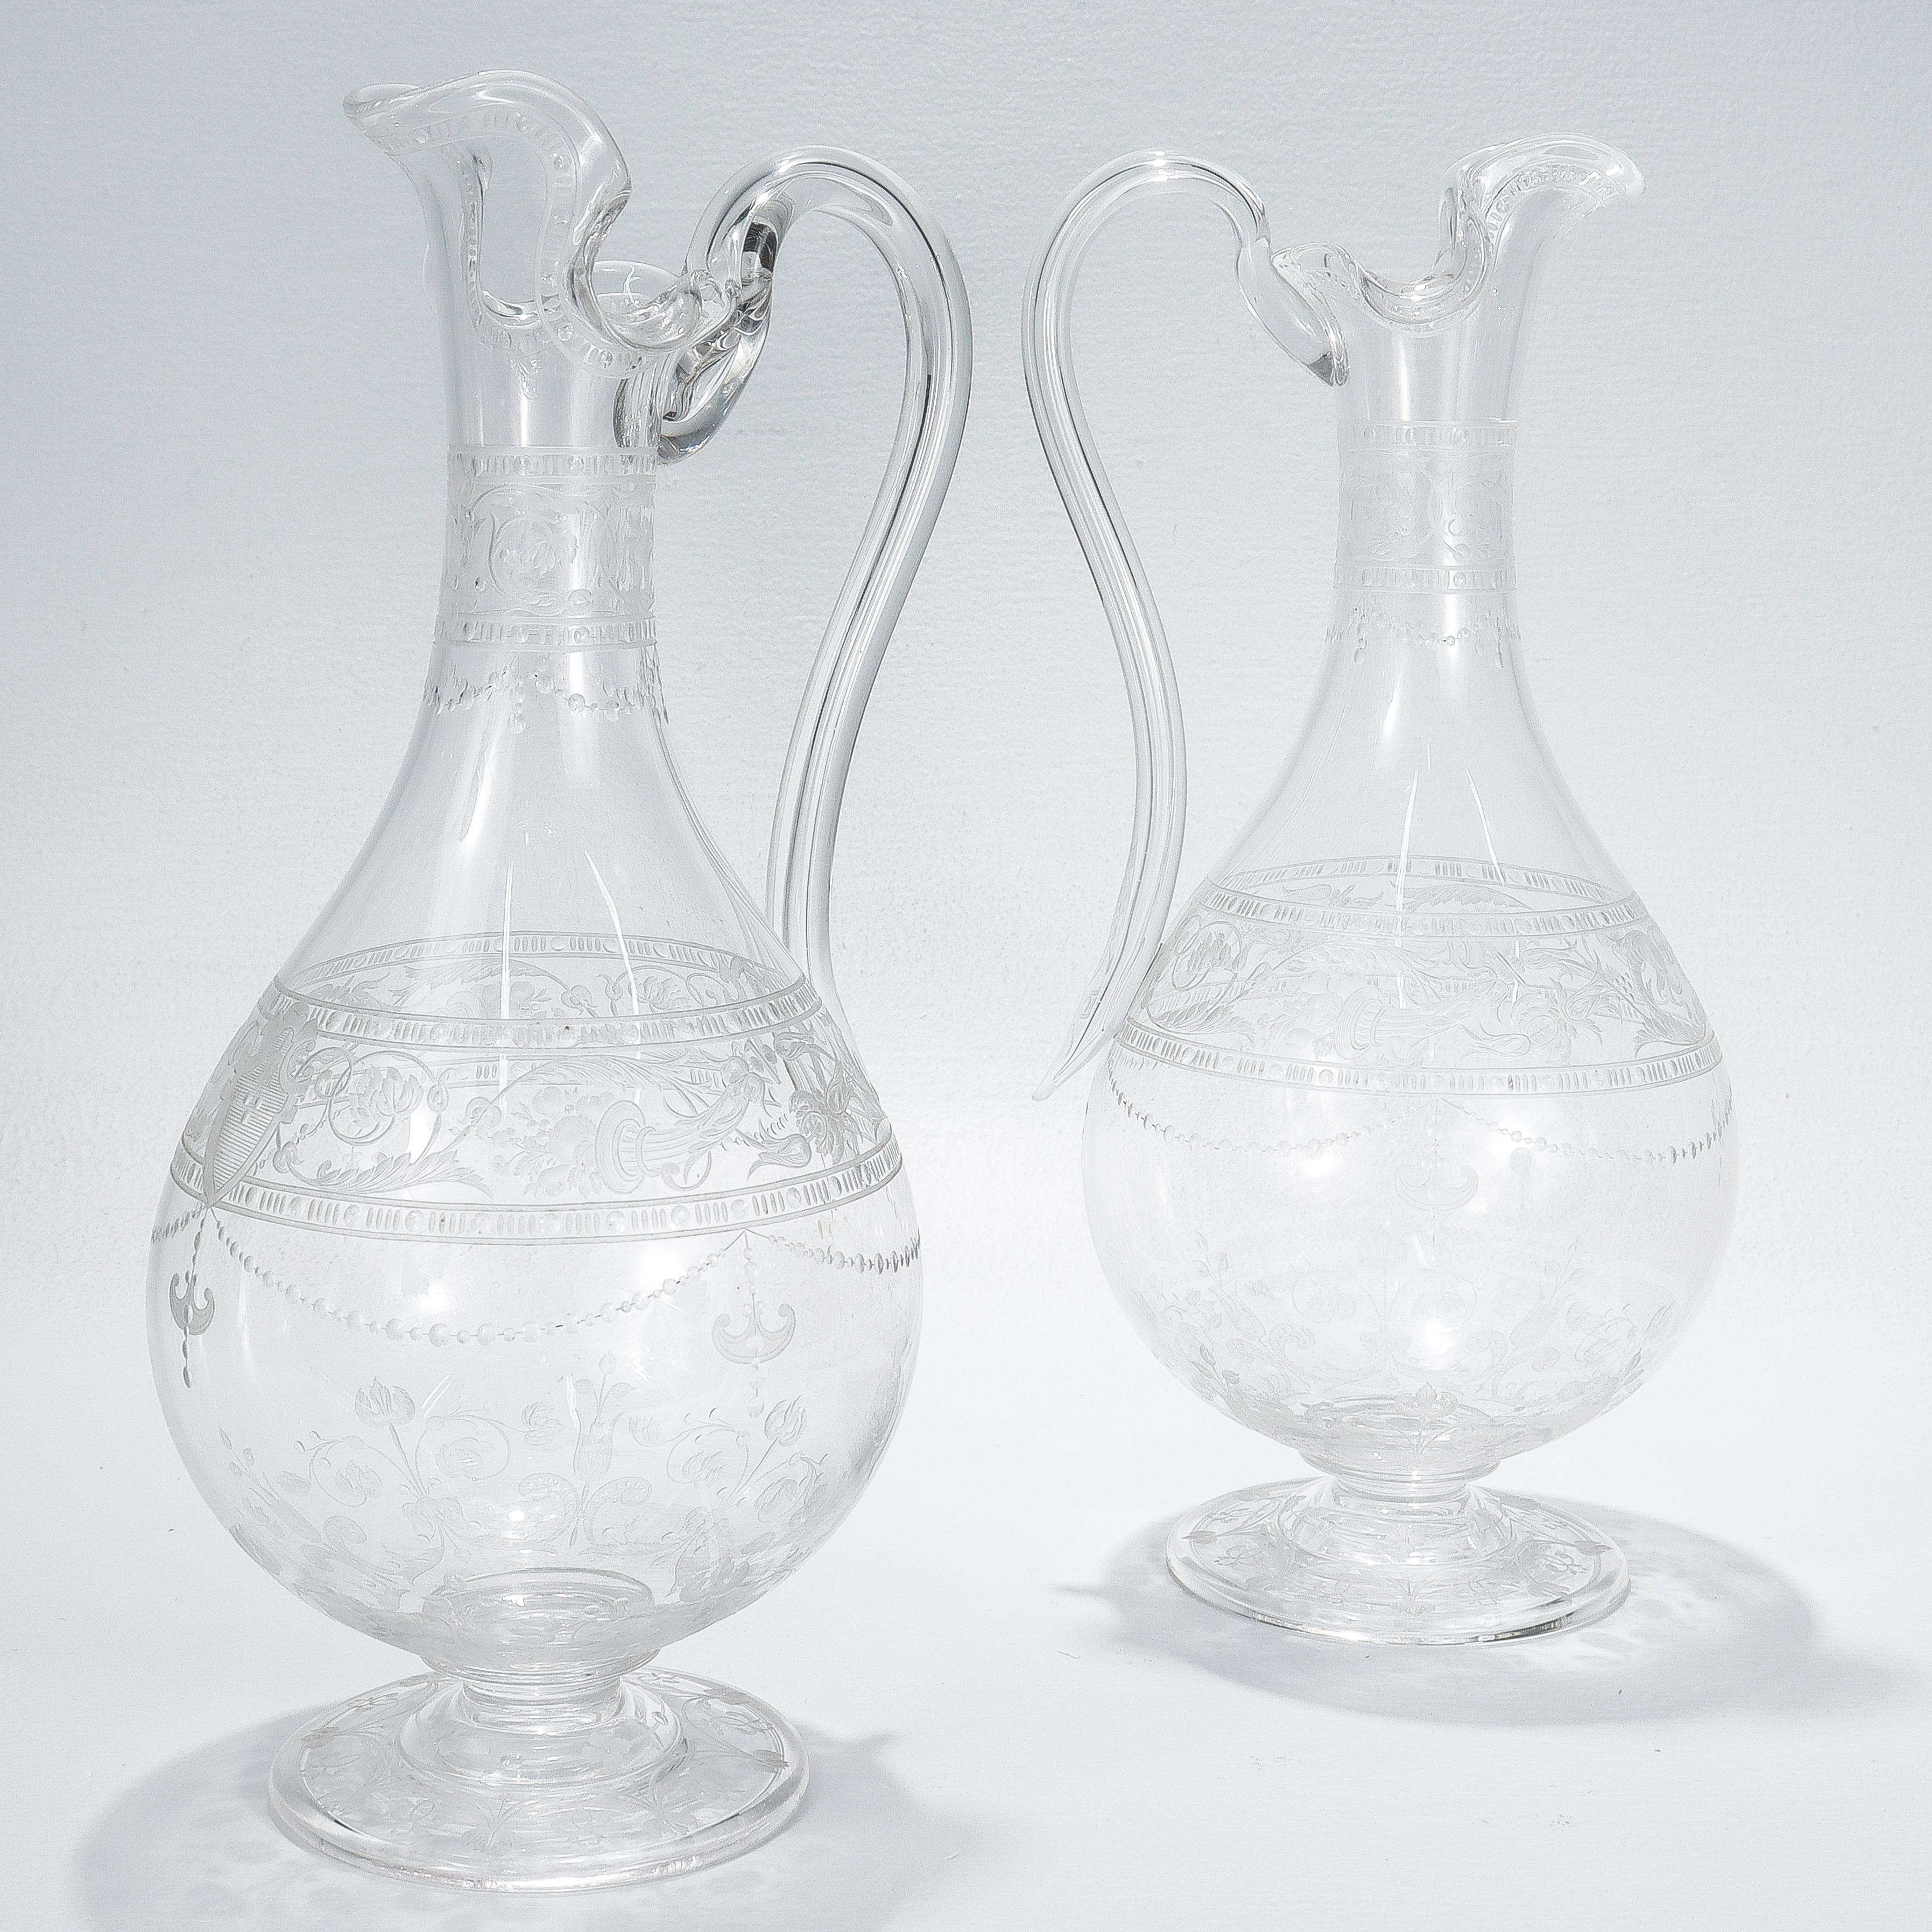 A fine pair of antique English etched and engraved glass water pitchers or decanters.

Attributed to Stevens & Williams or Webb.

With engraved & etched designs trelliswork, flowers, and shield devices.

Each with a shaped rim and curved